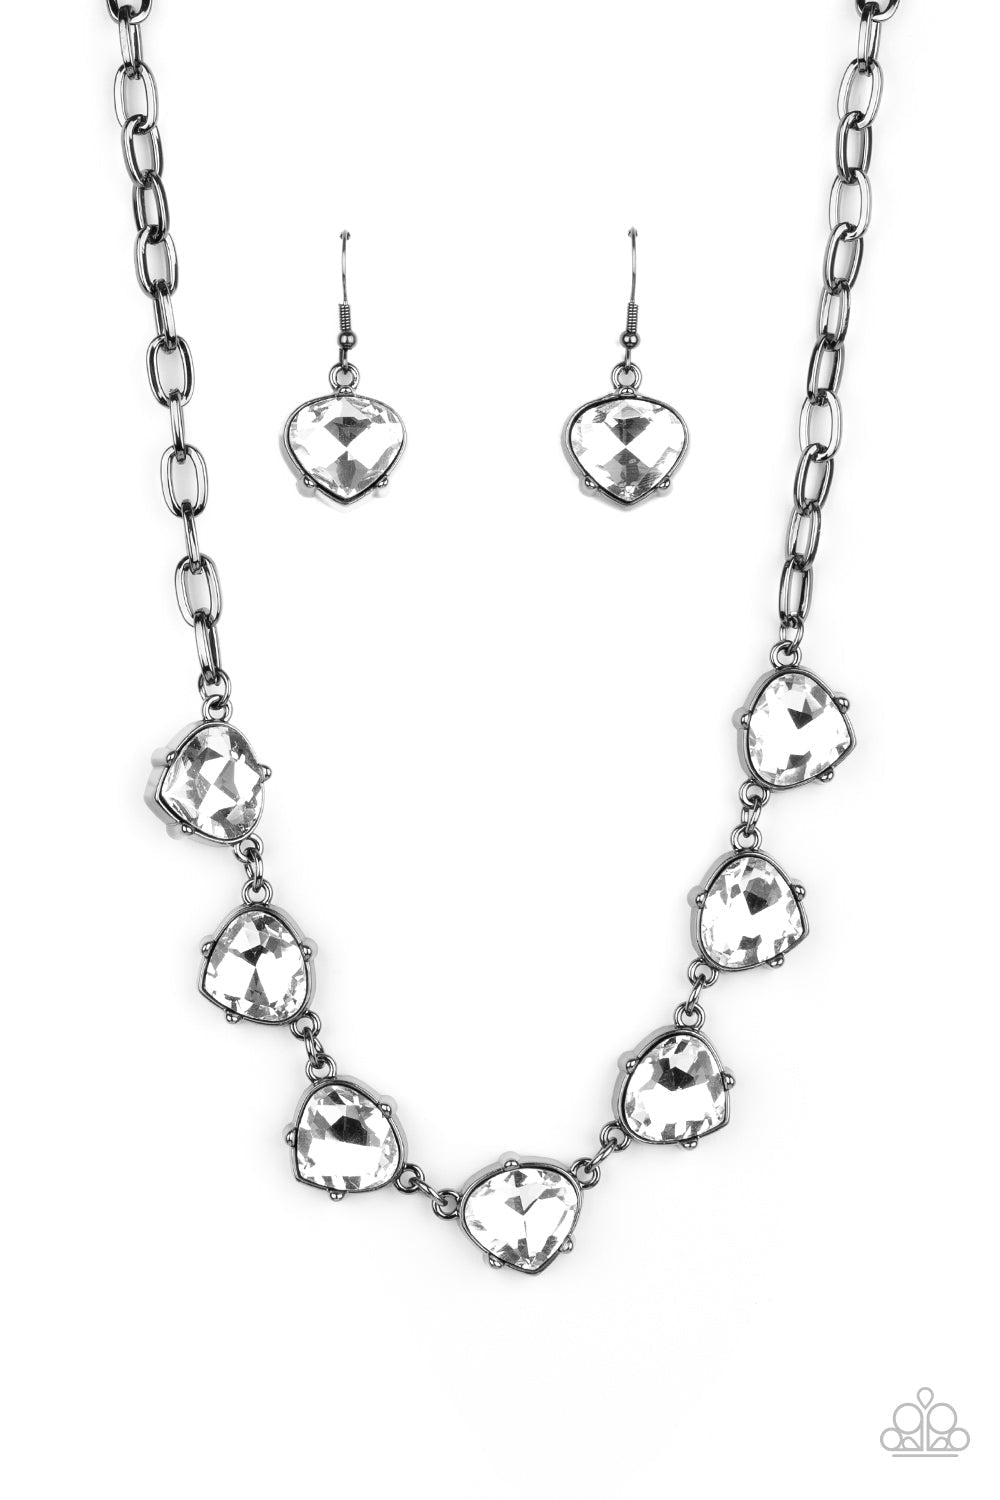 Star Quality Sparkle - Black (Gunmetal) Fashion Necklace - Paparazzi Accessories - Attached to an oversized gunmetal chain, faceted white teardrop frames delicately connect below the collar for a glamorous look. Features an adjustable clasp closure. 